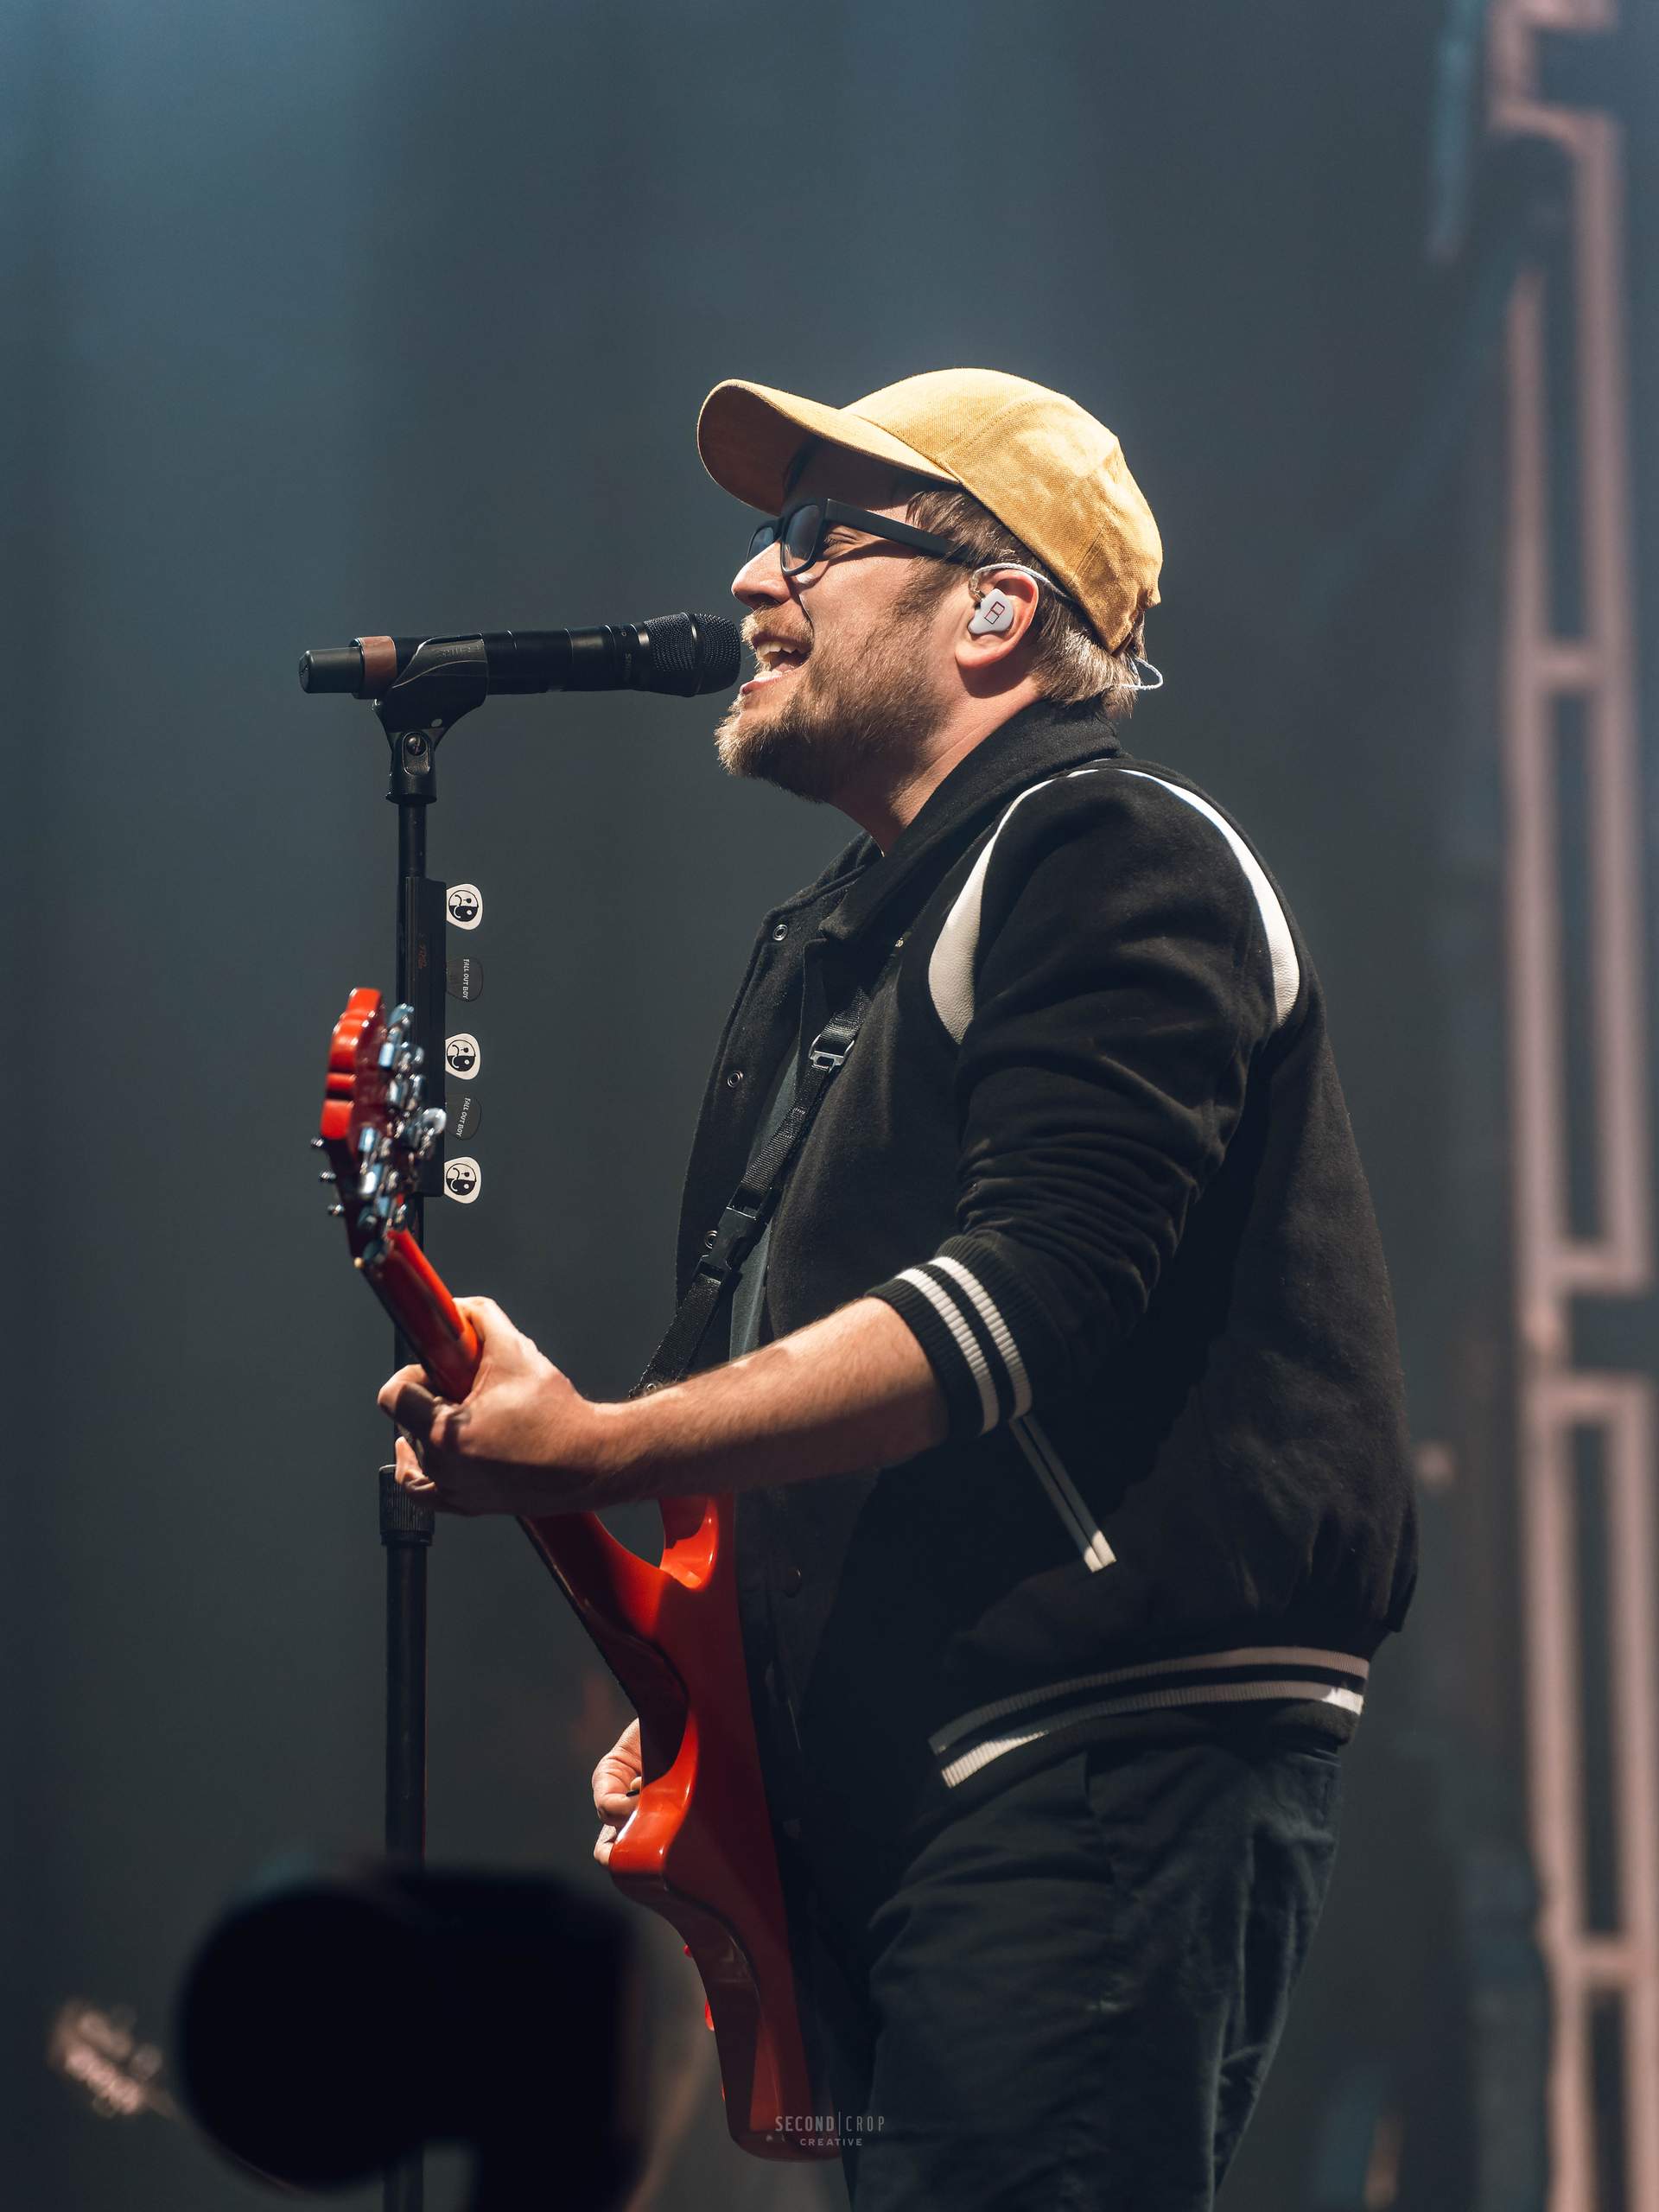 Fall Out Boy performing at Fiserv Forum on April 2, 2024 as part of their SO MUCH FOR (2OUR) DUST tour, photography by Ross Harried for Second Crop Music